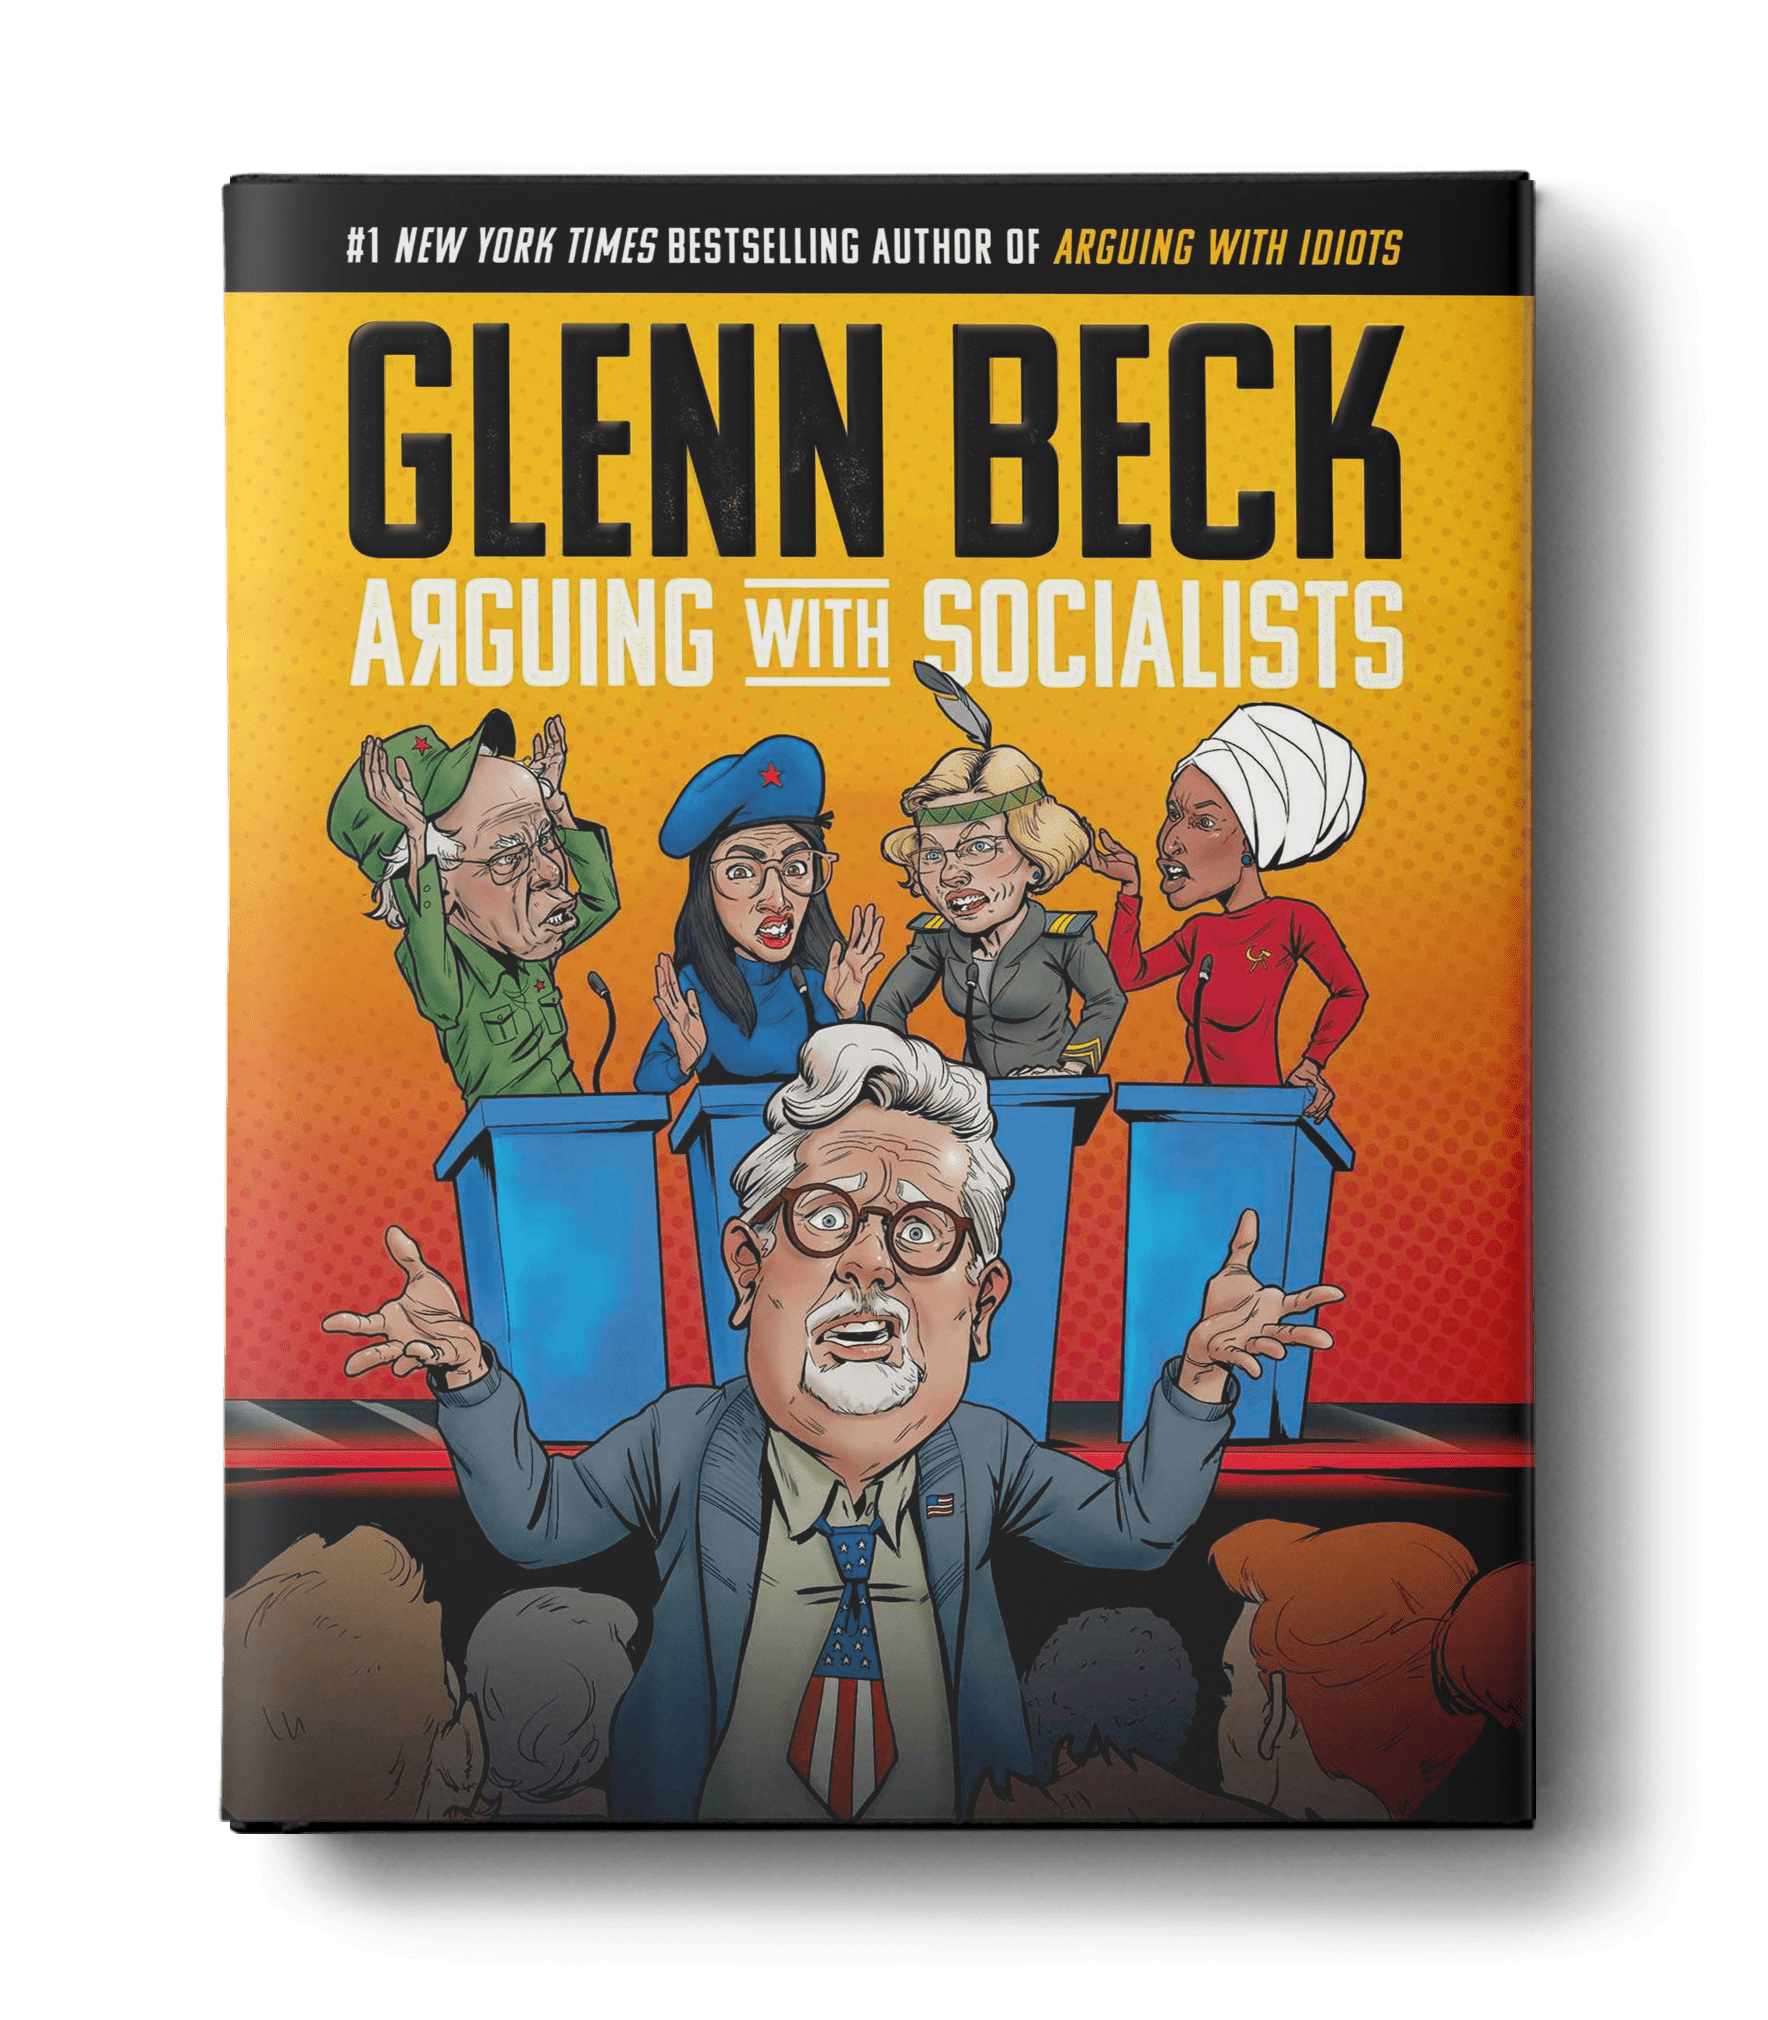 'Arguing with Socialists' by Glenn Beck